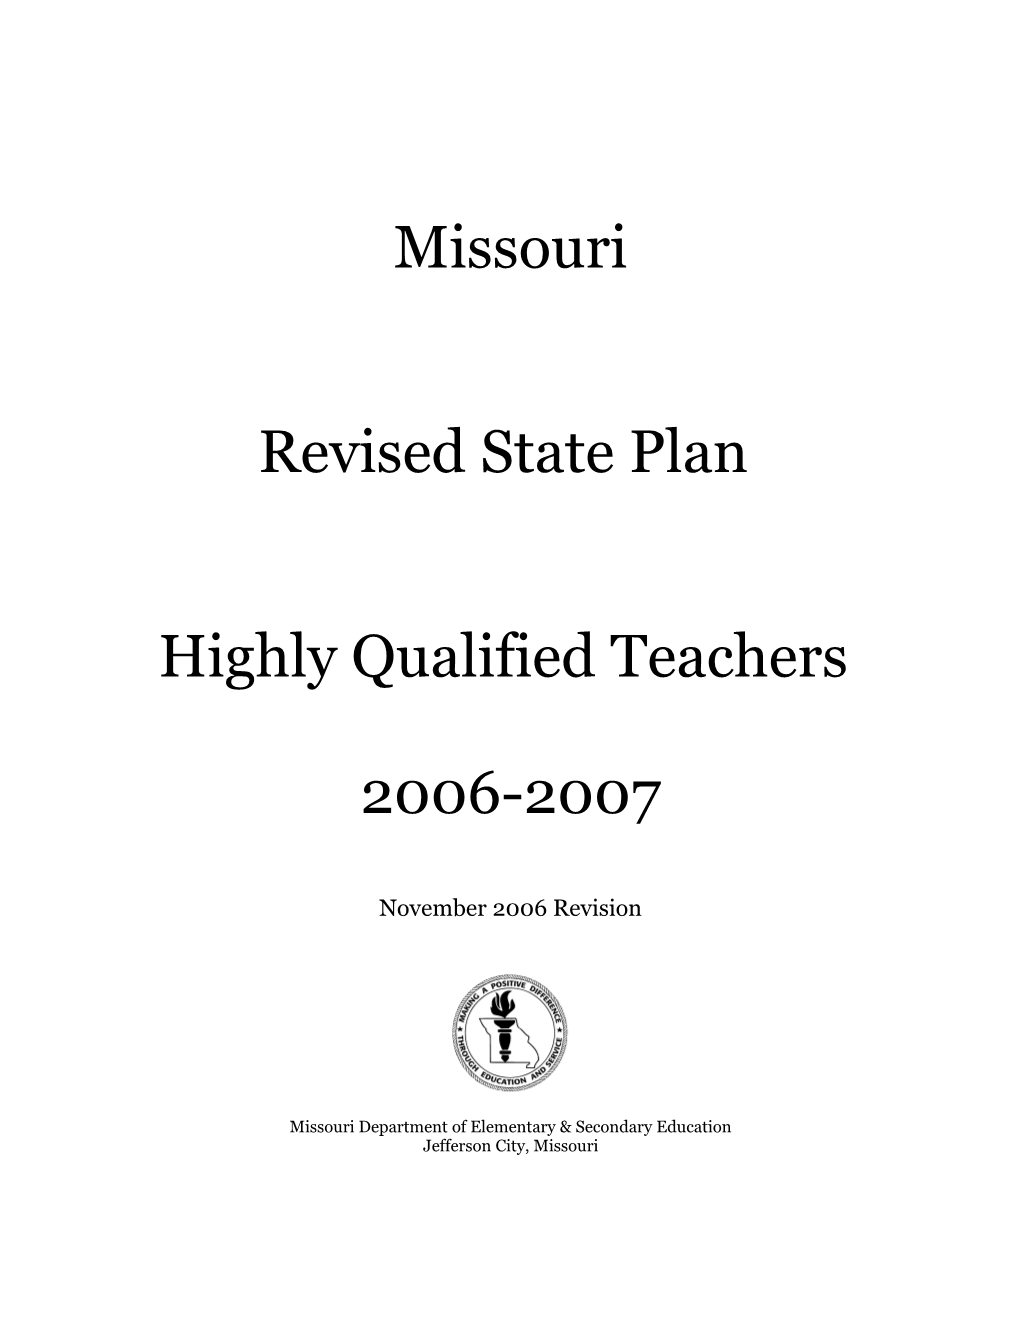 Missouri - Revised Highly Qualified Teachers State Plan (MS WORD)